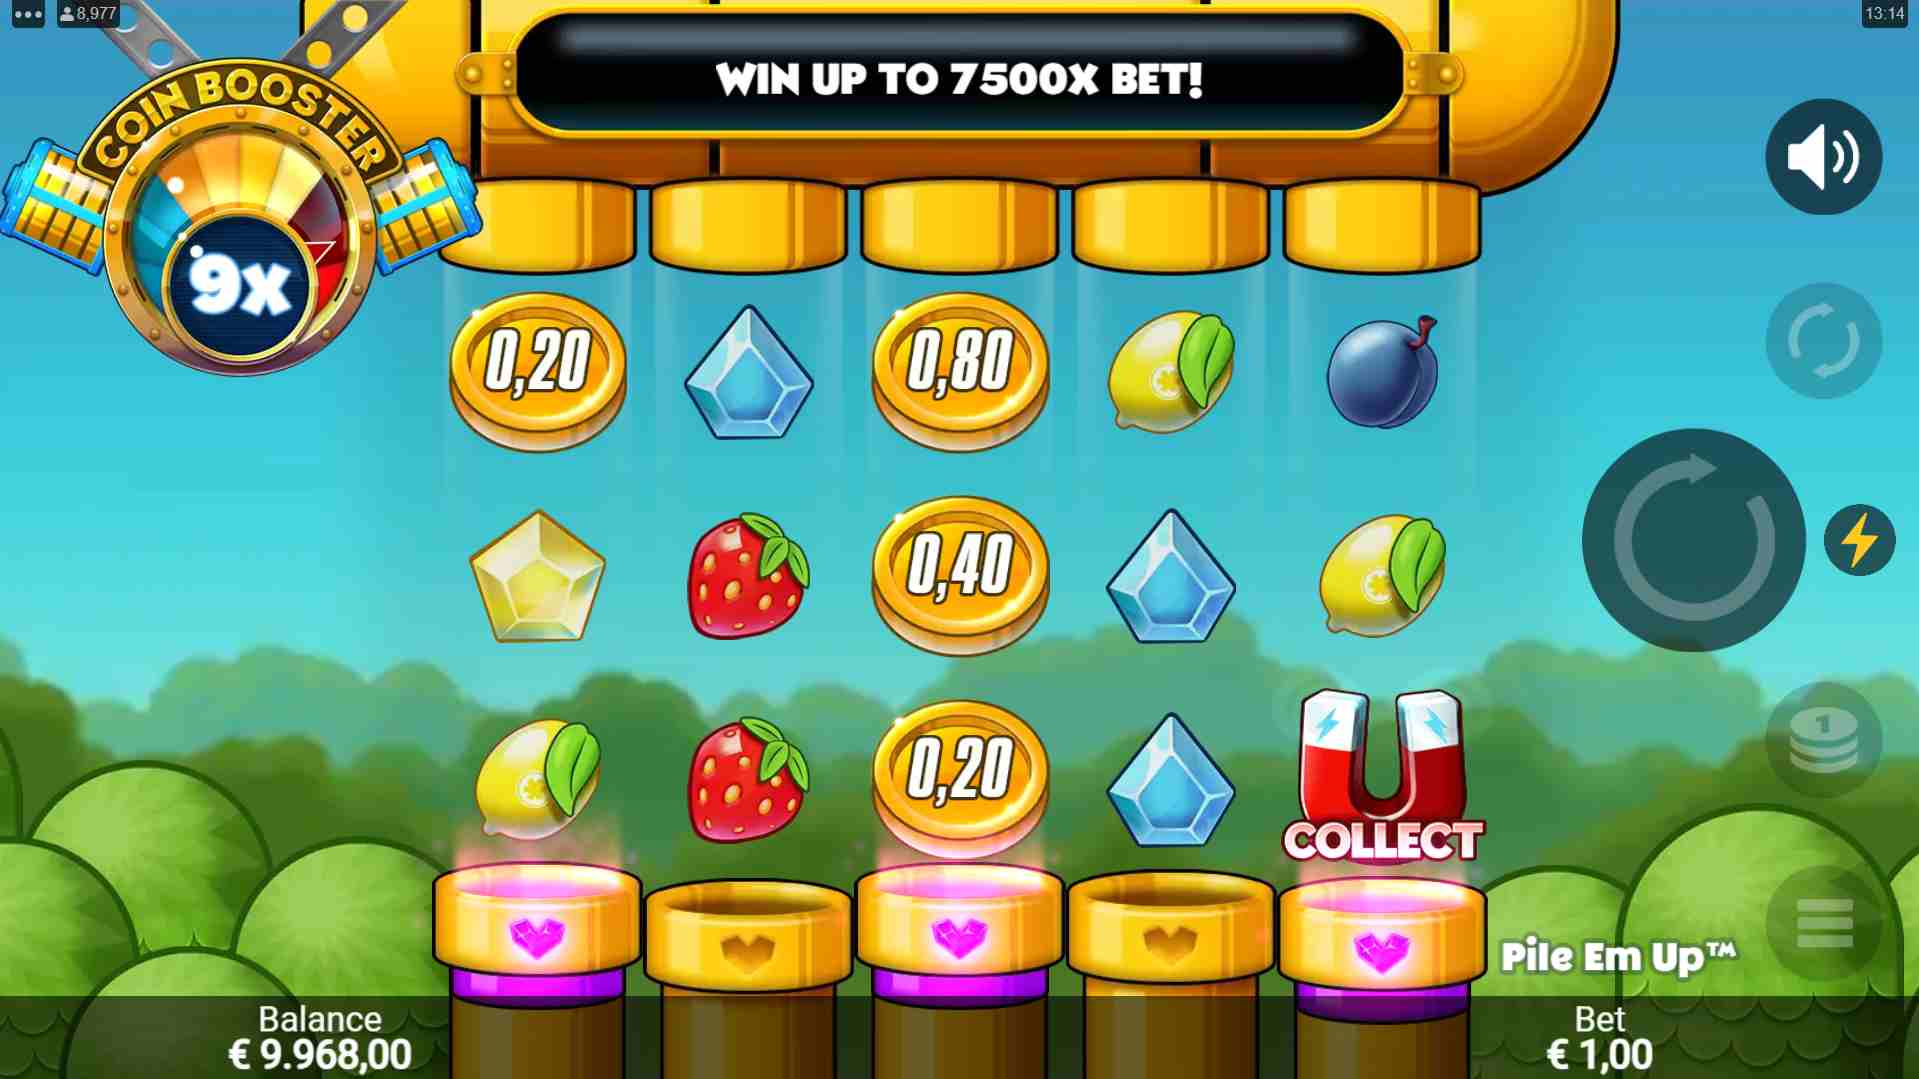 Pile 'Em Up Coin Booster Feature